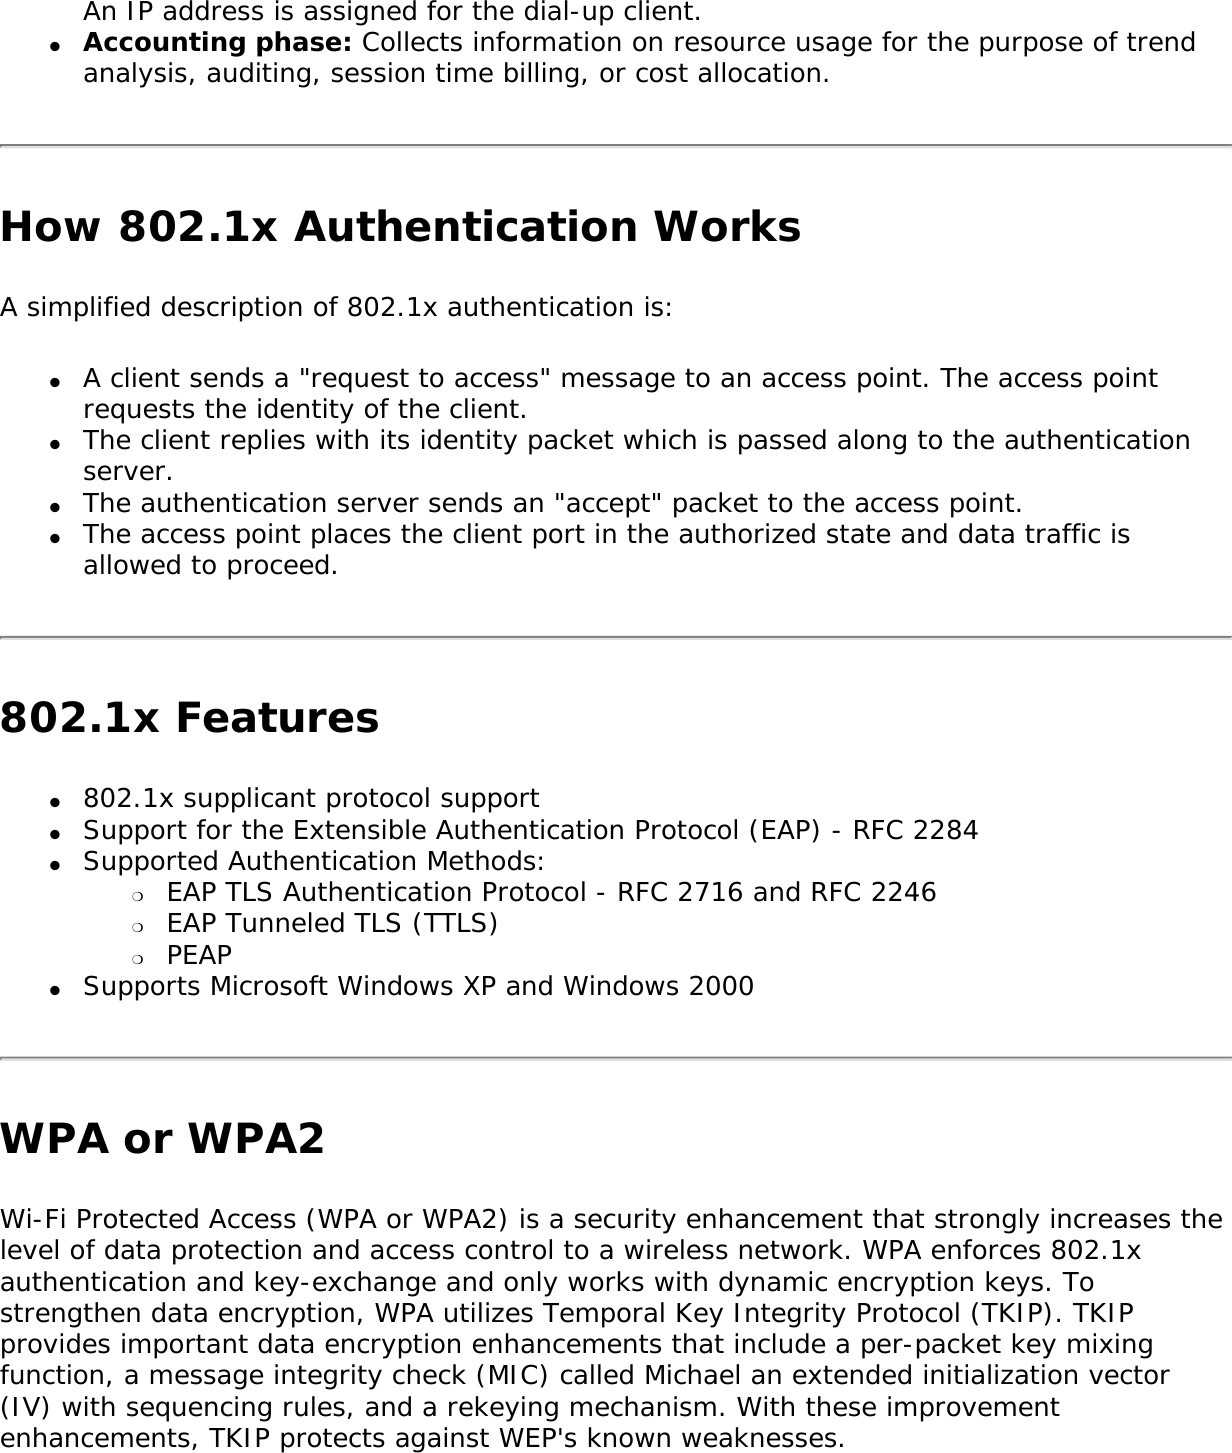 An IP address is assigned for the dial-up client. ●     Accounting phase: Collects information on resource usage for the purpose of trend analysis, auditing, session time billing, or cost allocation. How 802.1x Authentication WorksA simplified description of 802.1x authentication is: ●     A client sends a &quot;request to access&quot; message to an access point. The access point requests the identity of the client. ●     The client replies with its identity packet which is passed along to the authentication server. ●     The authentication server sends an &quot;accept&quot; packet to the access point. ●     The access point places the client port in the authorized state and data traffic is allowed to proceed. 802.1x Features●     802.1x supplicant protocol support ●     Support for the Extensible Authentication Protocol (EAP) - RFC 2284 ●     Supported Authentication Methods: ❍     EAP TLS Authentication Protocol - RFC 2716 and RFC 2246 ❍     EAP Tunneled TLS (TTLS) ❍     PEAP ●     Supports Microsoft Windows XP and Windows 2000 WPA or WPA2Wi-Fi Protected Access (WPA or WPA2) is a security enhancement that strongly increases the level of data protection and access control to a wireless network. WPA enforces 802.1x authentication and key-exchange and only works with dynamic encryption keys. To strengthen data encryption, WPA utilizes Temporal Key Integrity Protocol (TKIP). TKIP provides important data encryption enhancements that include a per-packet key mixing function, a message integrity check (MIC) called Michael an extended initialization vector (IV) with sequencing rules, and a rekeying mechanism. With these improvement enhancements, TKIP protects against WEP&apos;s known weaknesses. 